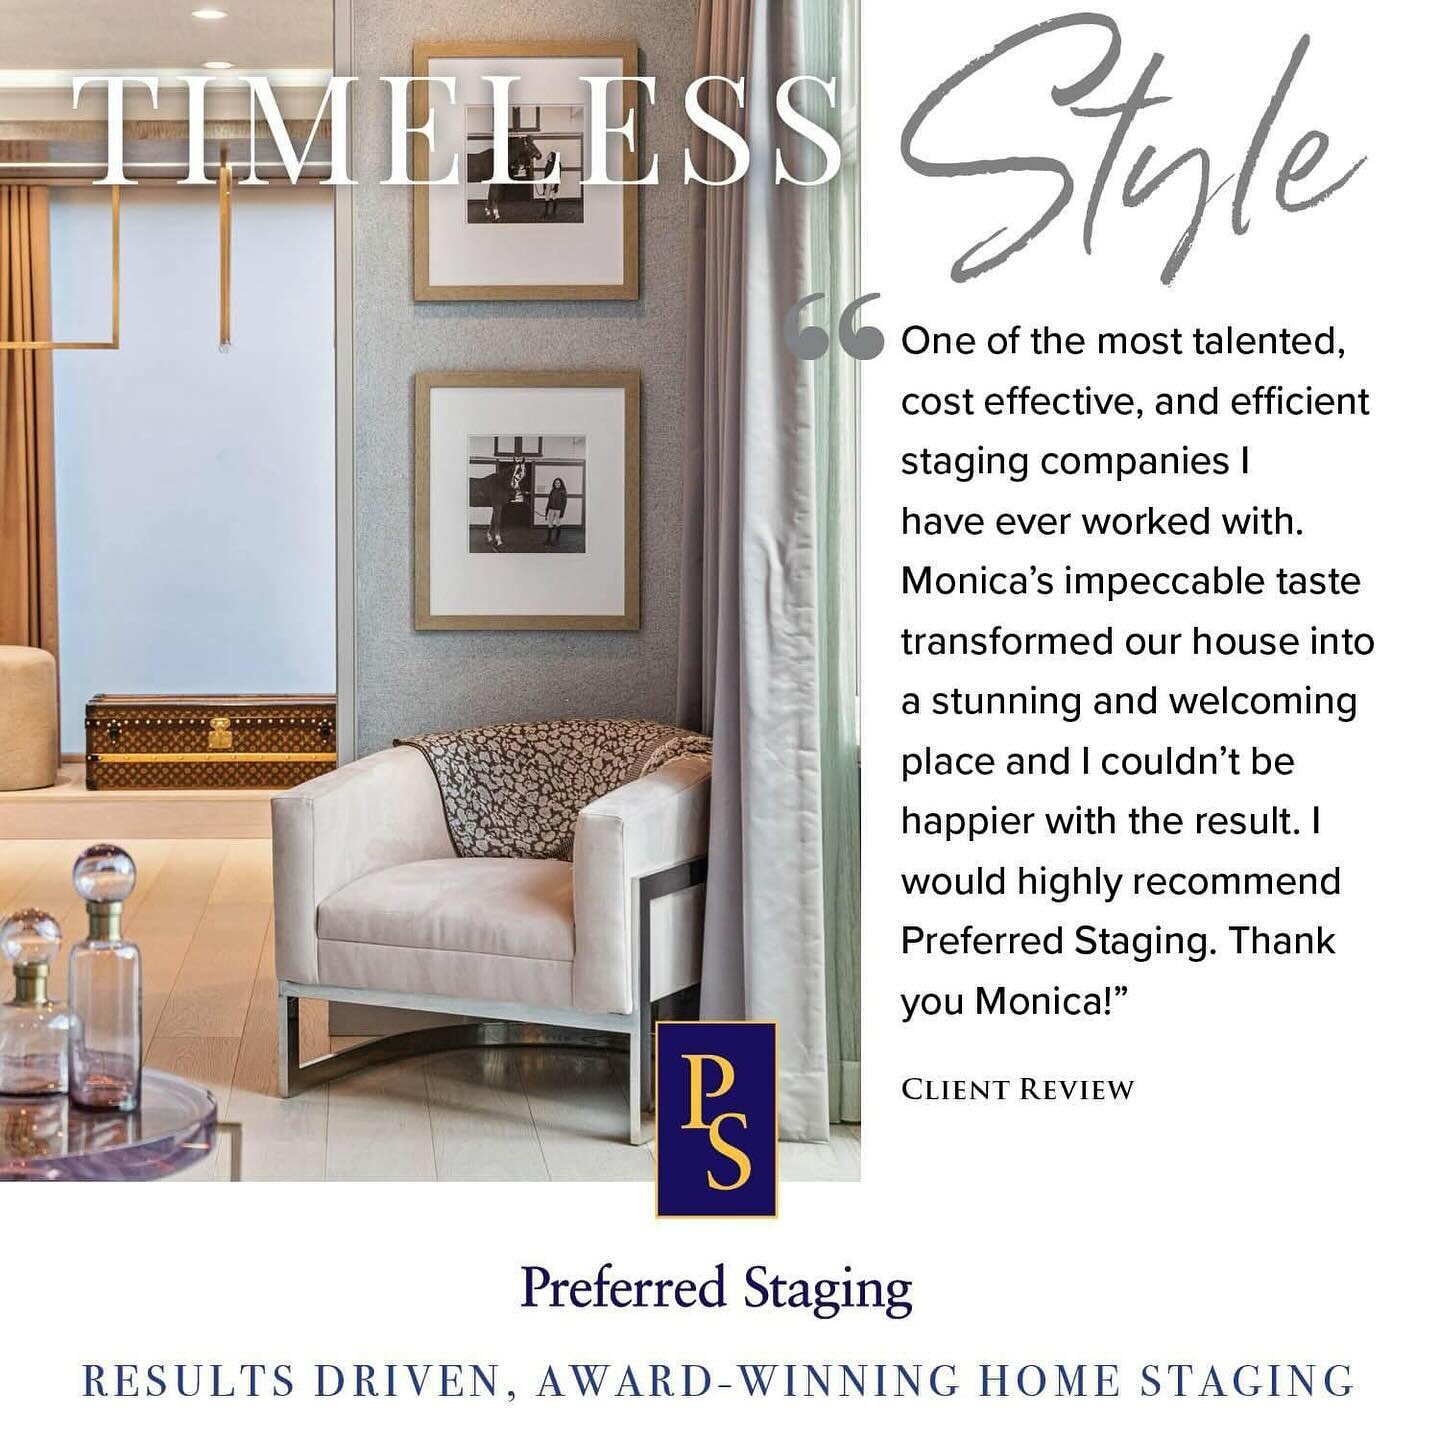 Our award-winning team creates the perfect aesthetic for your listing that will attract the best buyers, especially in a competitive market! 

If you&rsquo;re ready to elevate your Real Estate, give us a call! http://preferredstaging.com